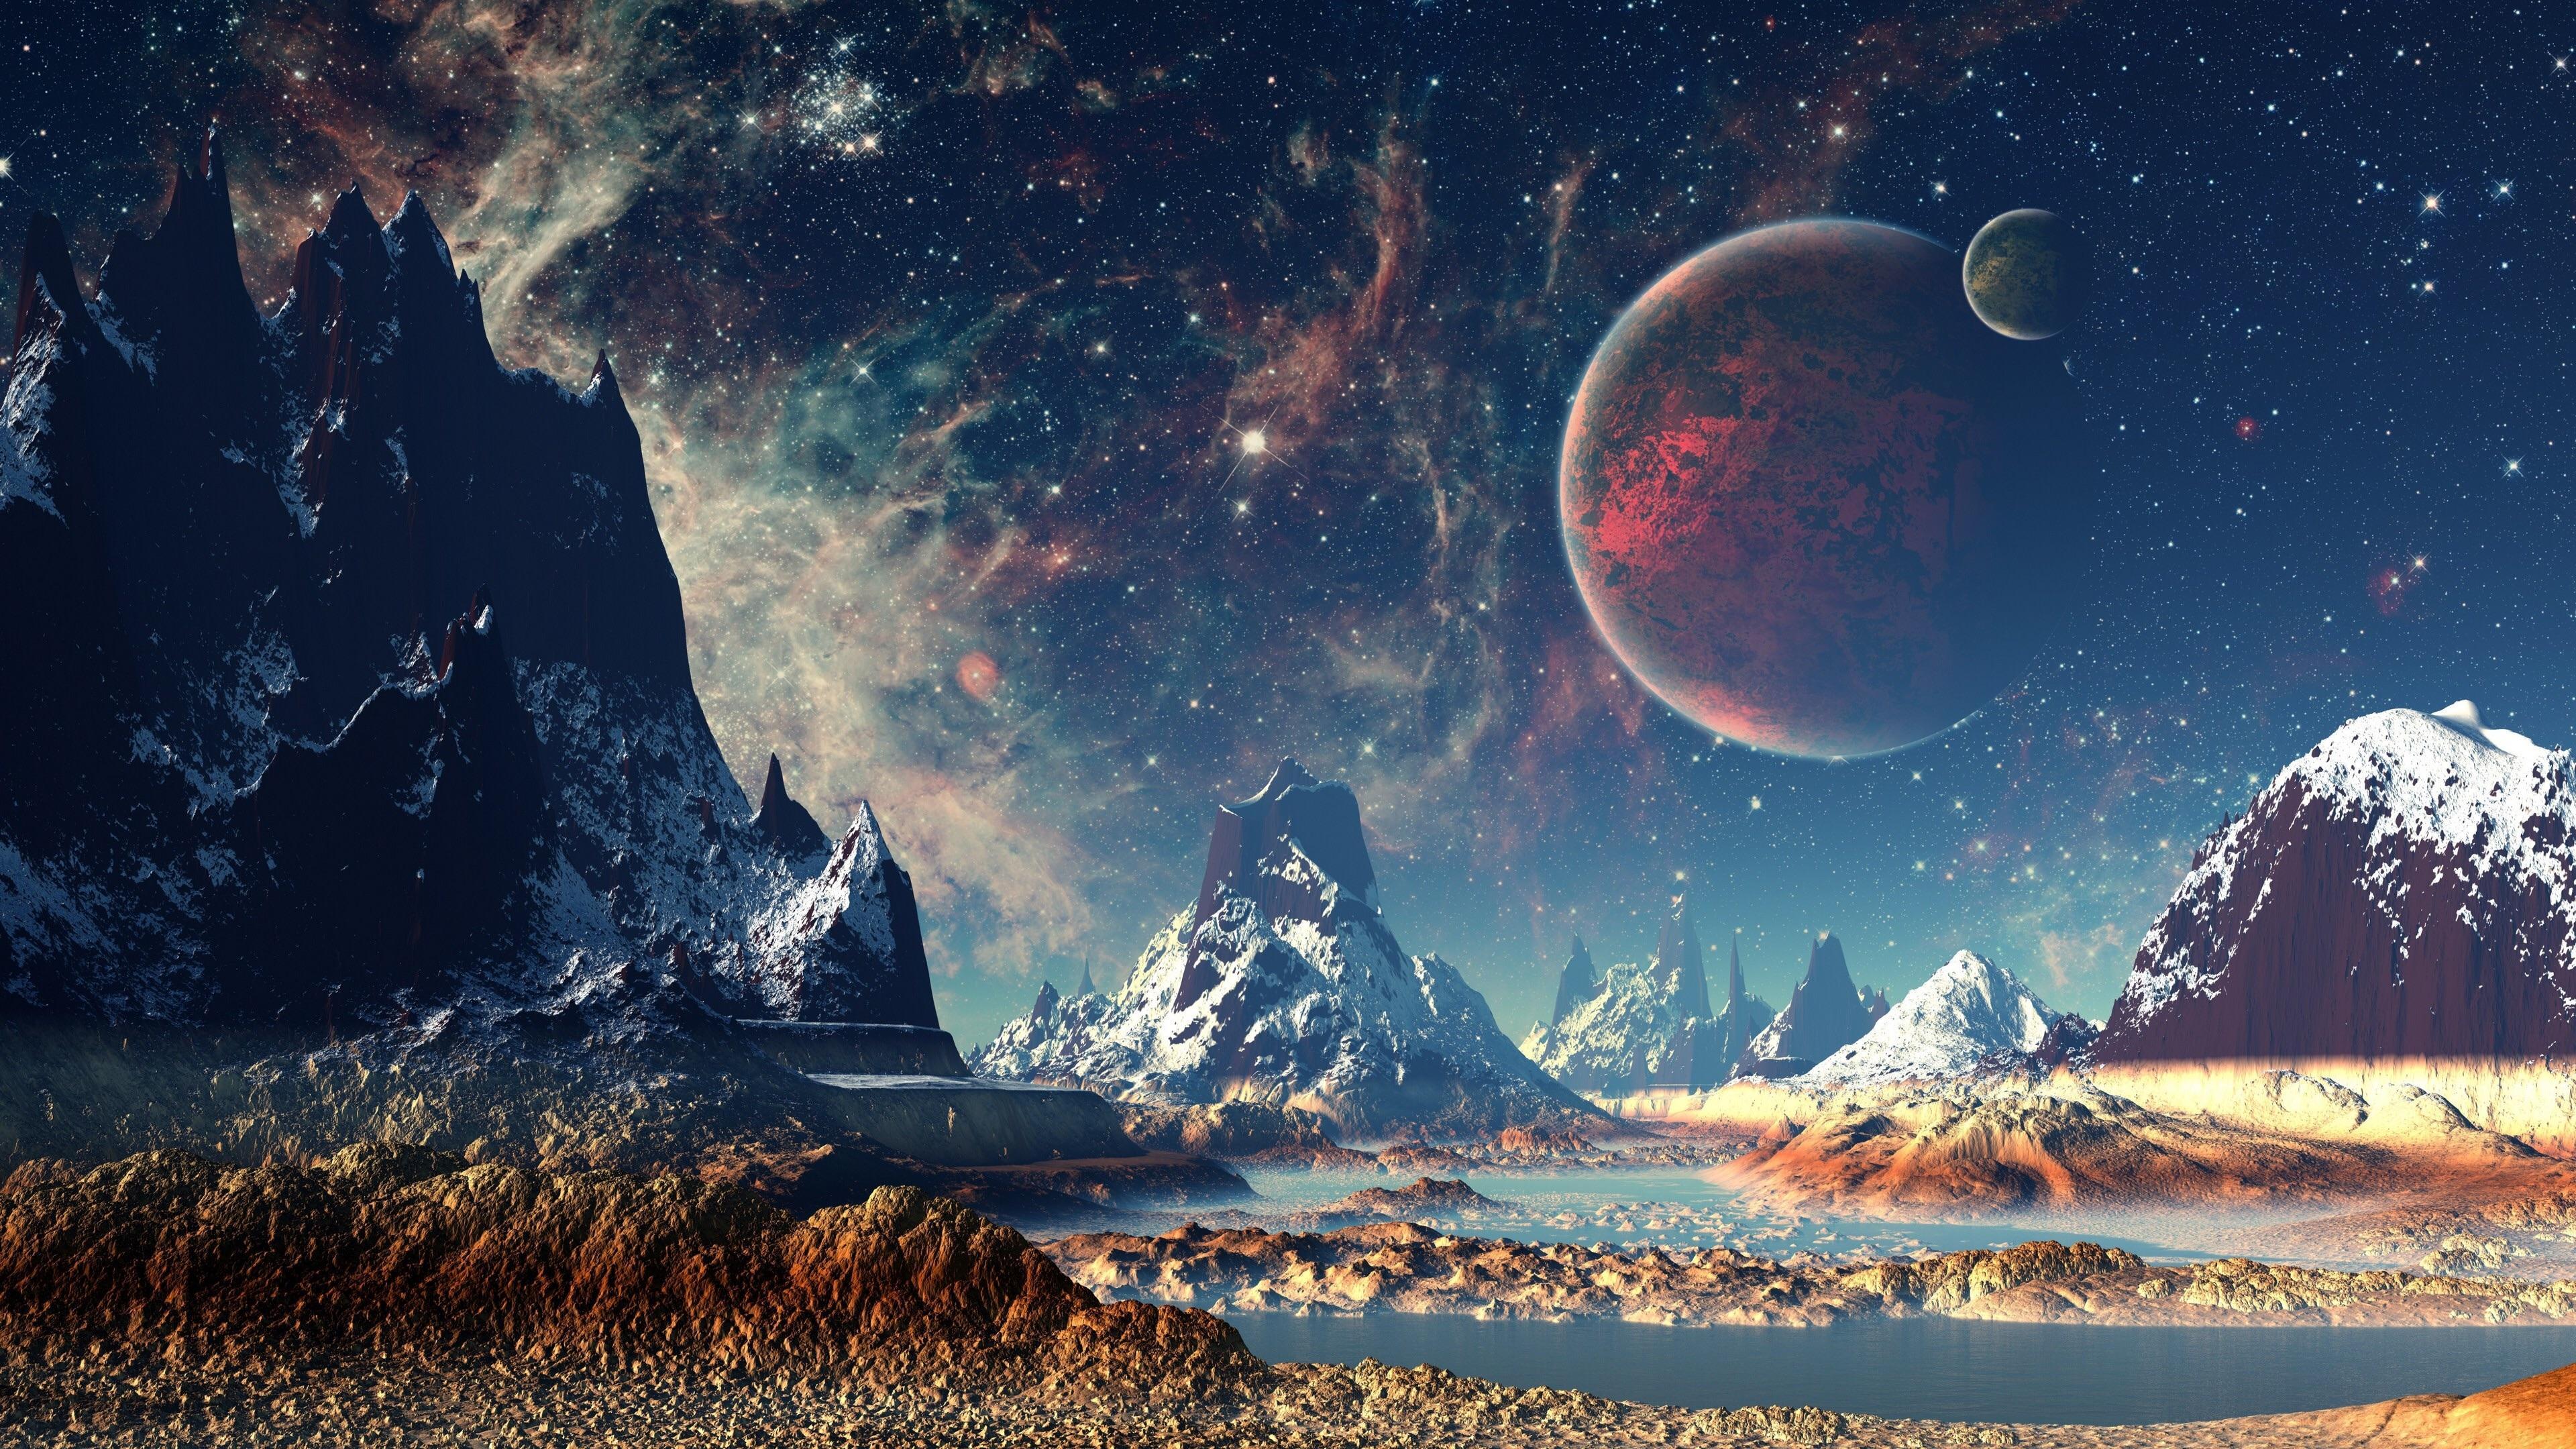 ultra hd space-fantasy wallpapers for imac